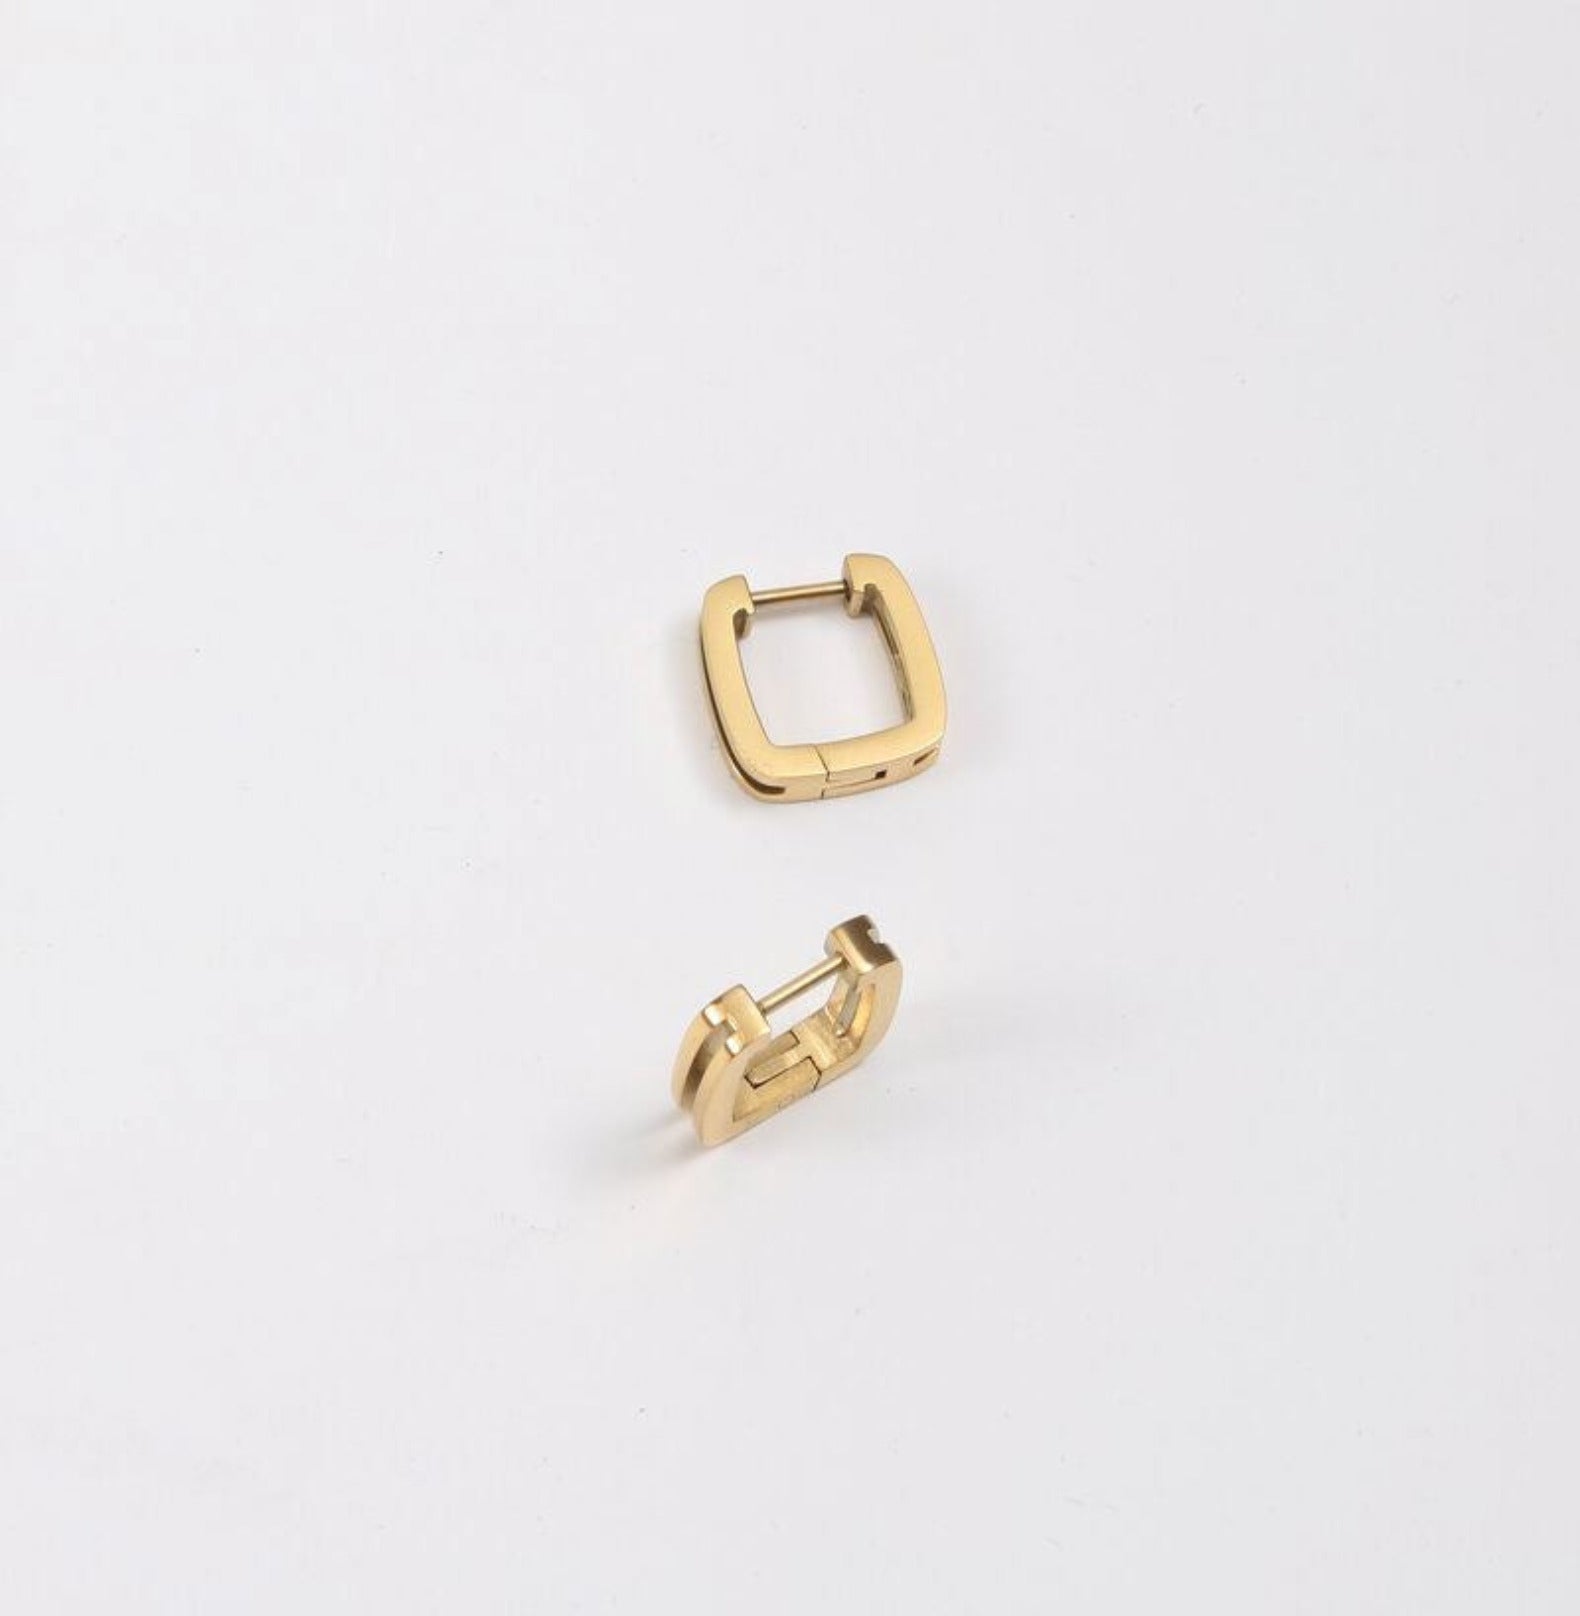 SQUARE HOLLOW HOOP EARRING - GOLD earing Yubama Jewelry Online Store - The Elegant Designs of Gold and Silver ! Gold 